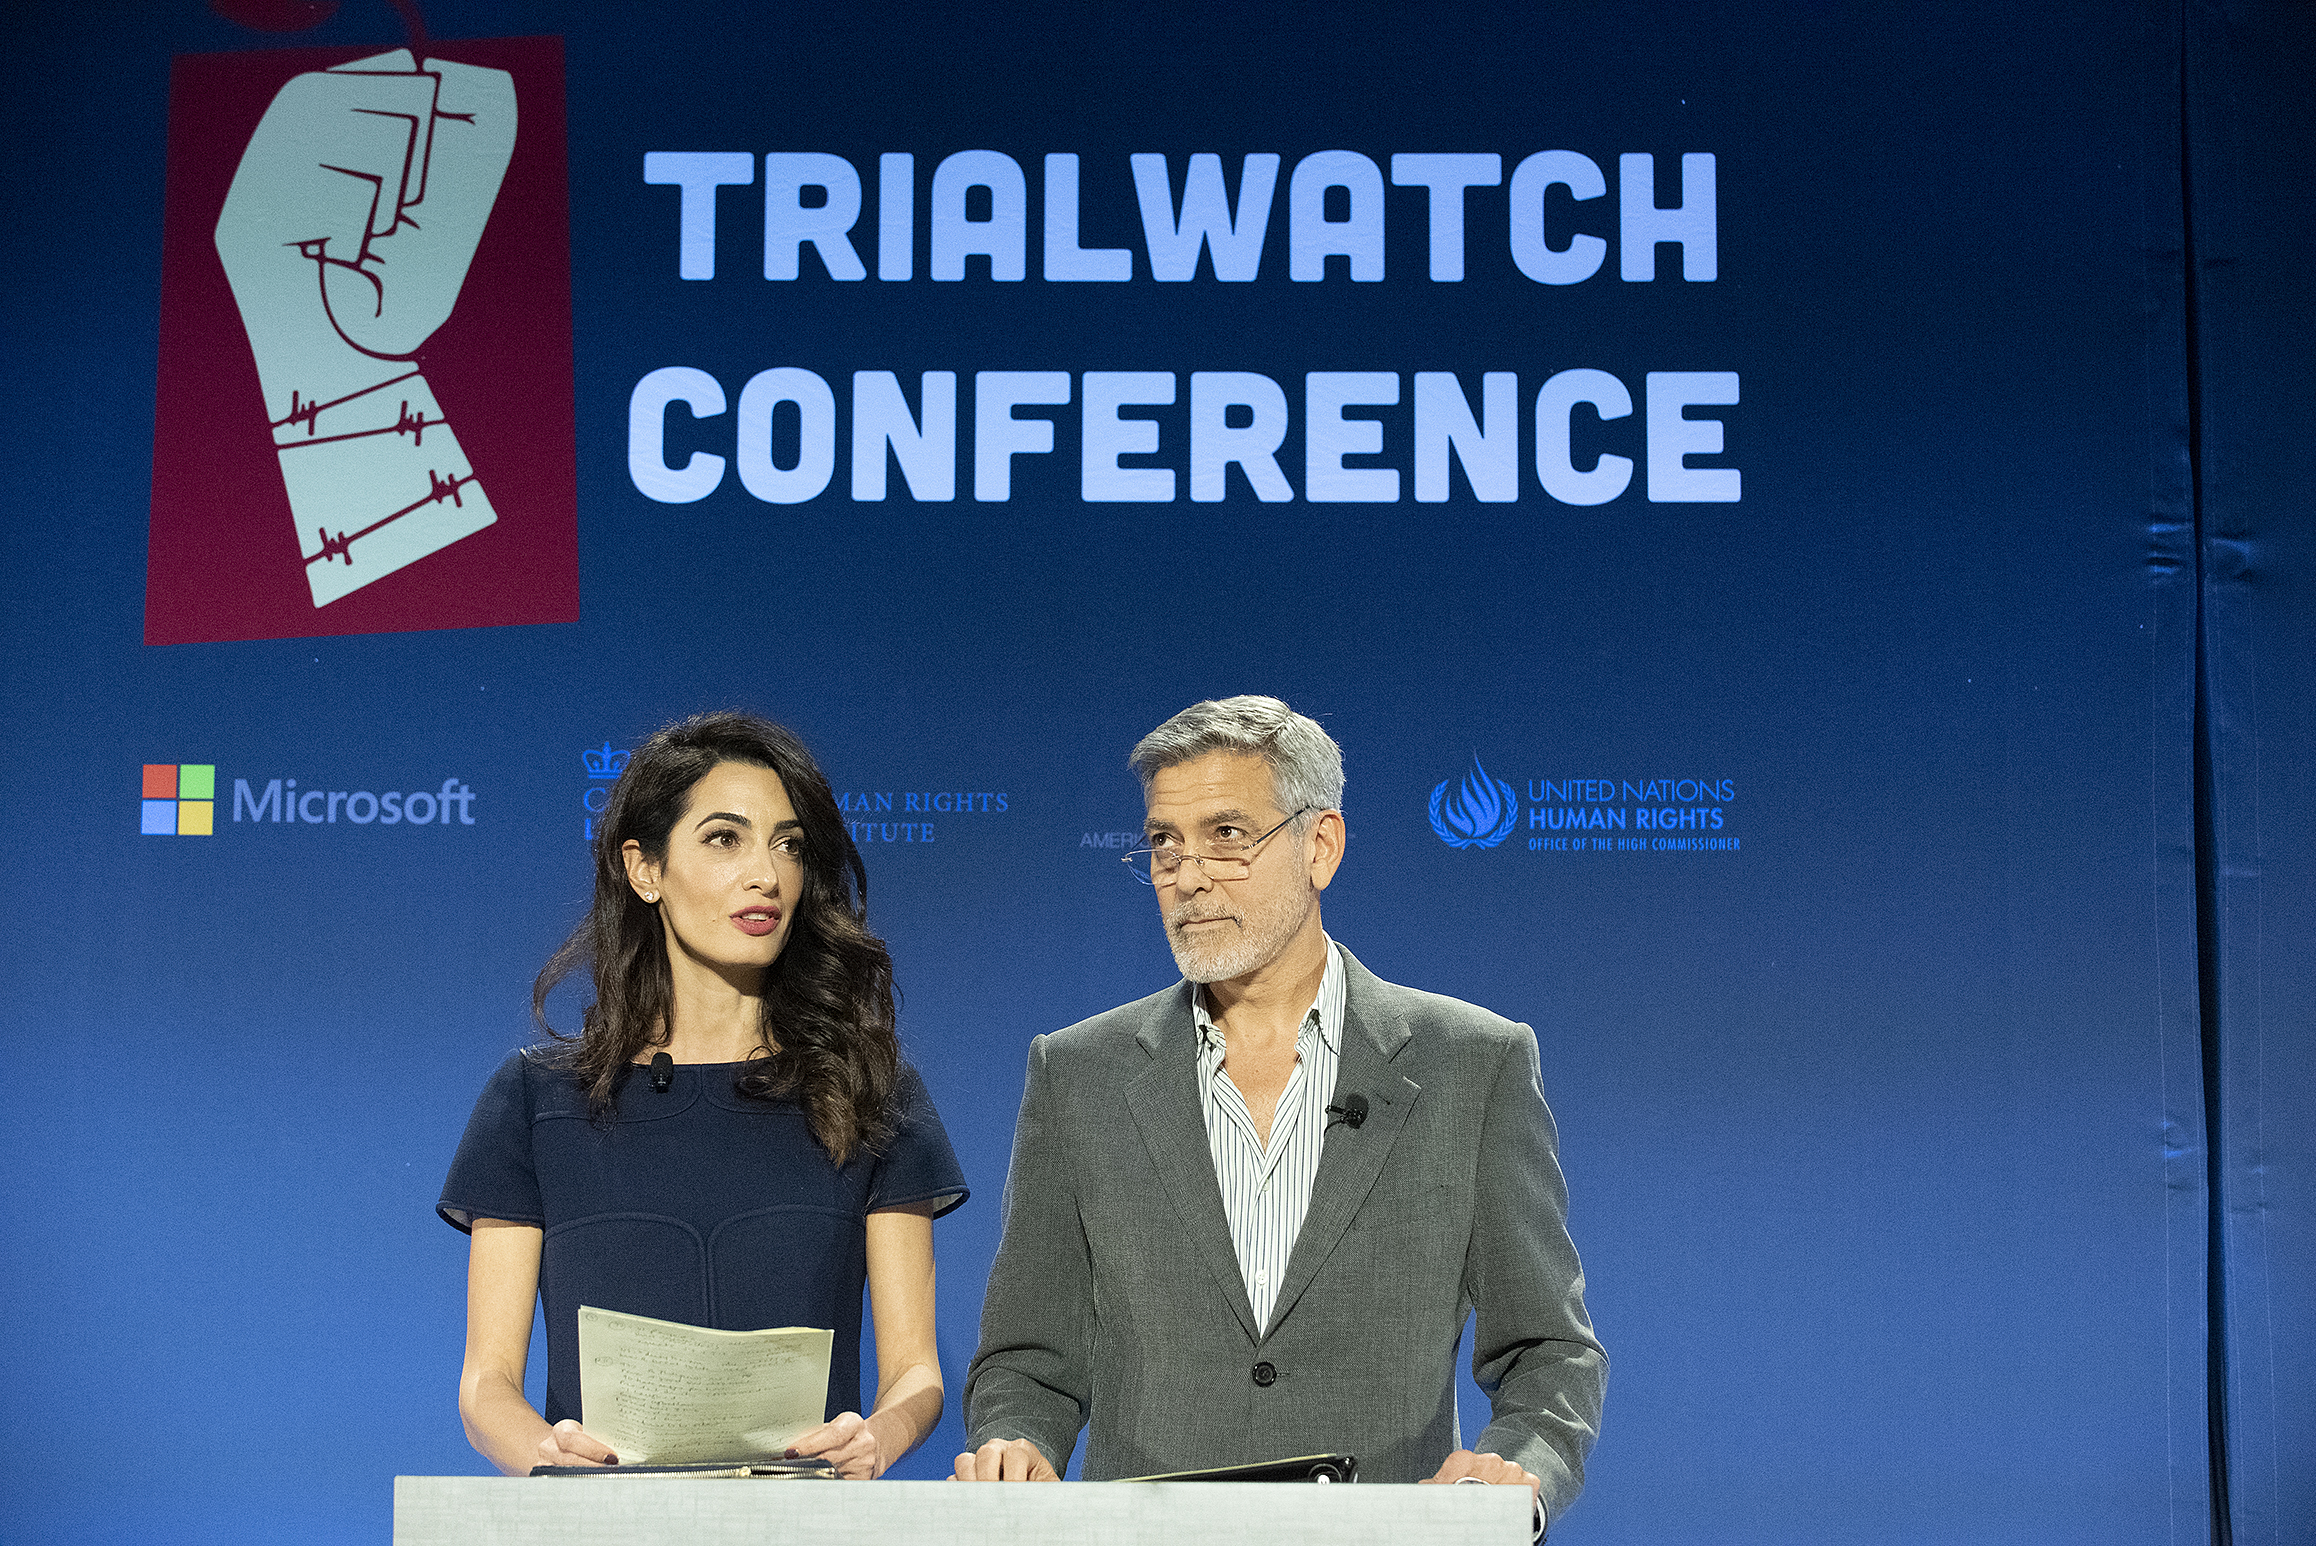 CFJ Co-Founders George and Amal Clooney at the TrialWatch Conference